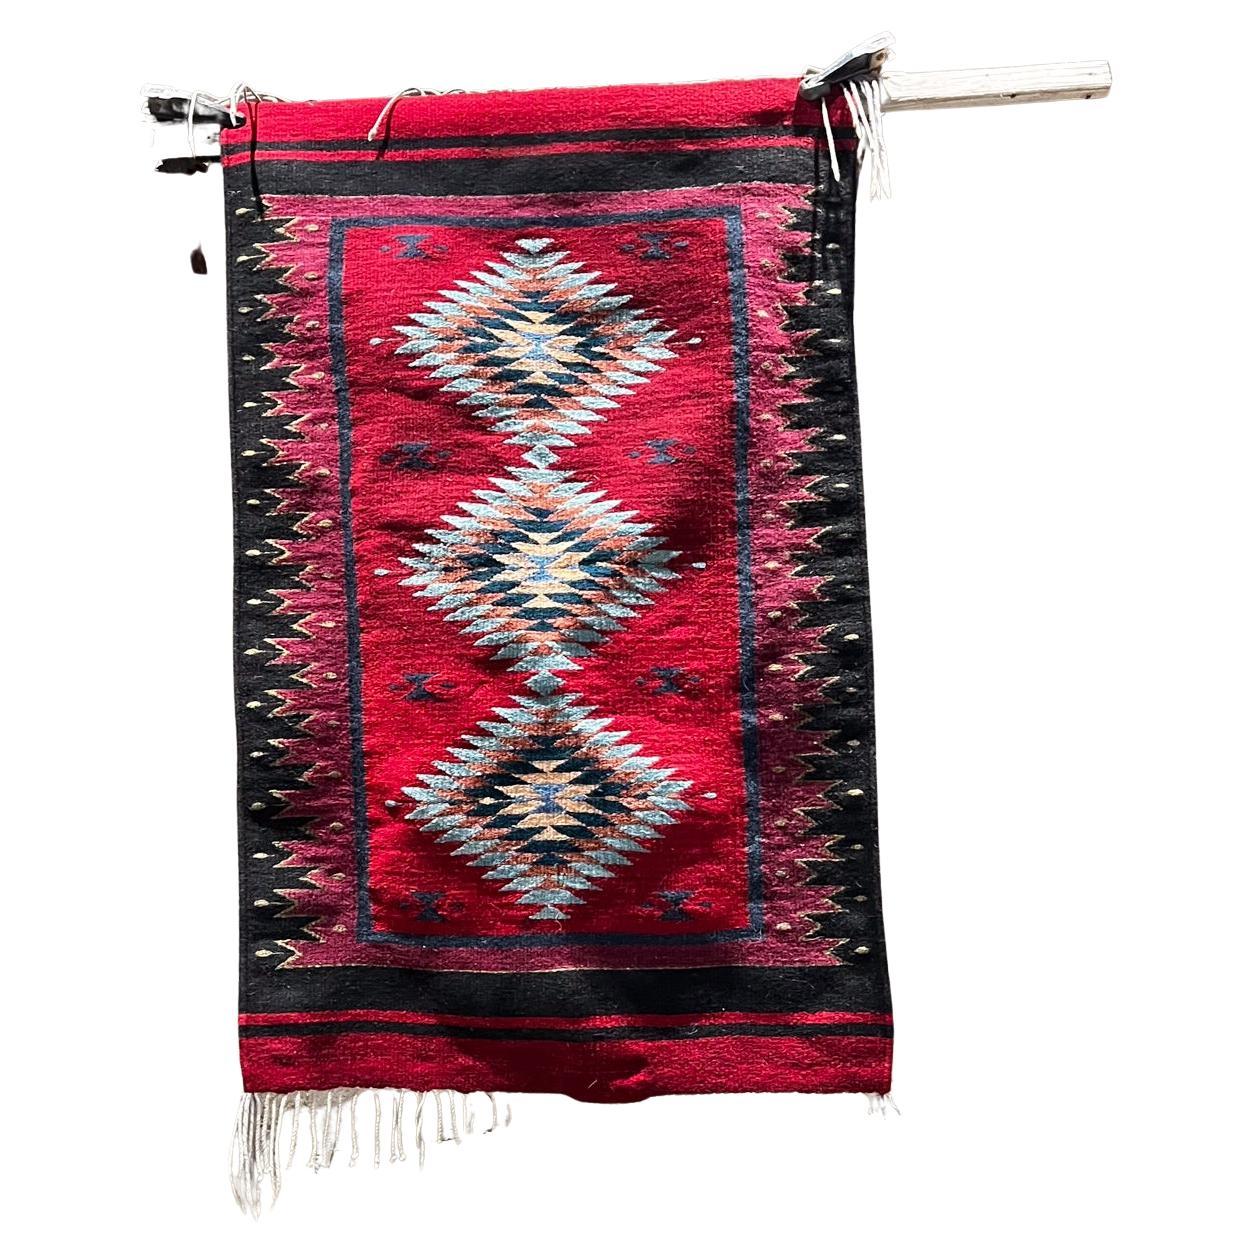 Native Navajo Style Wall Art Tapestry Colorful Black Pink Red